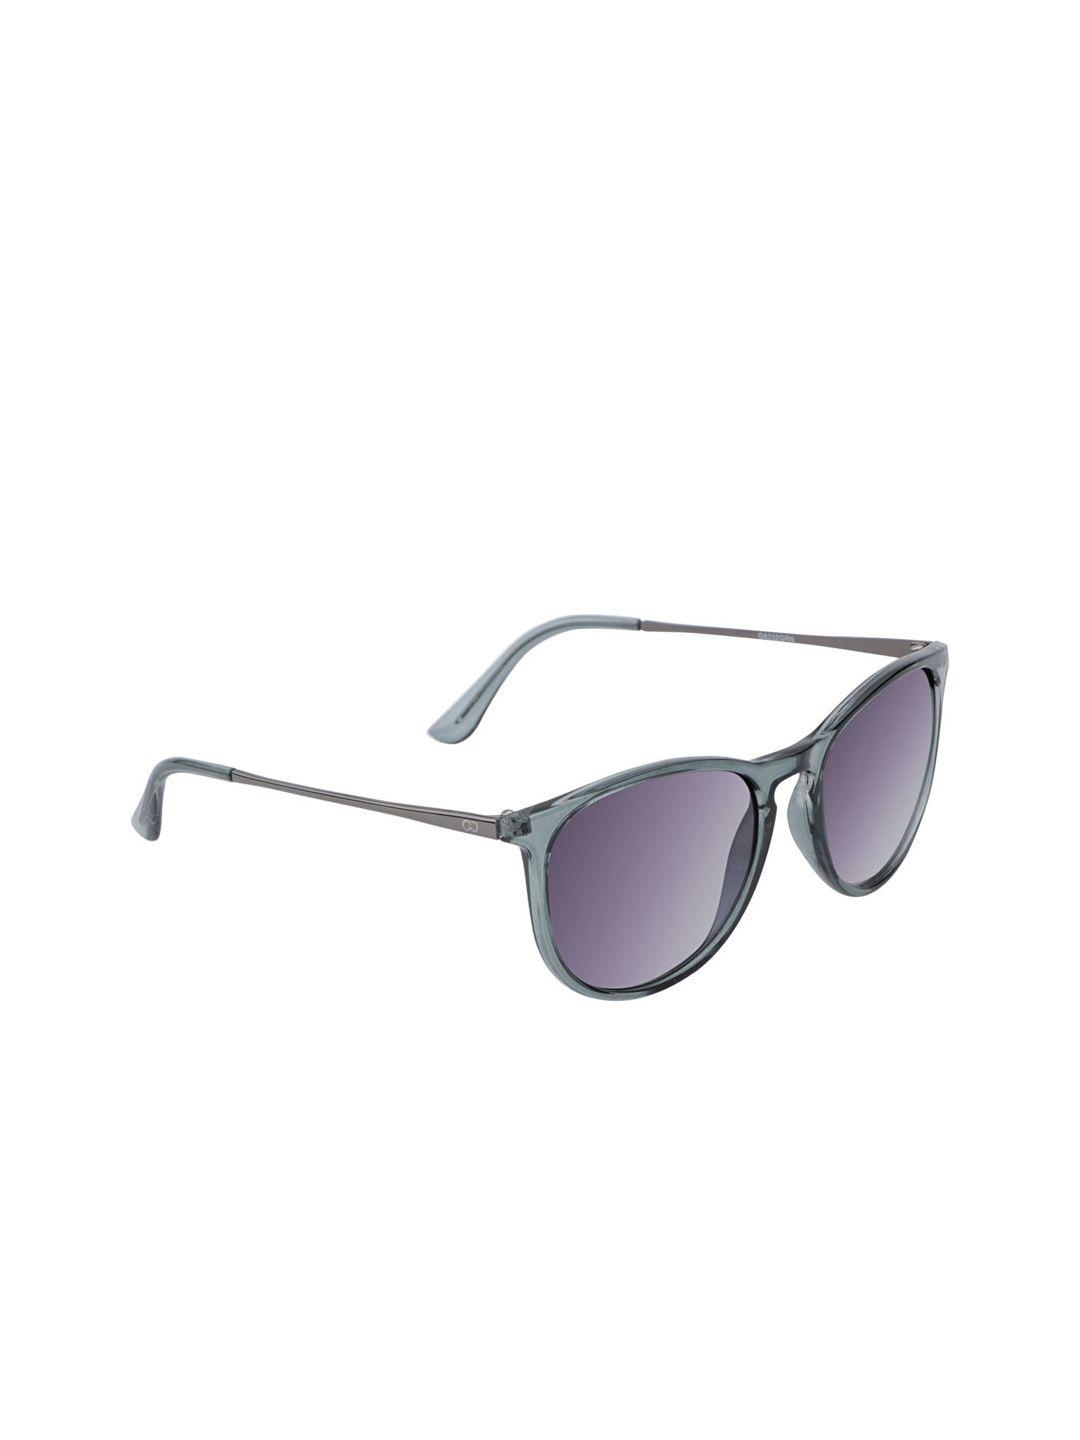 gio collection unisex oversized sunglasses g6232grn